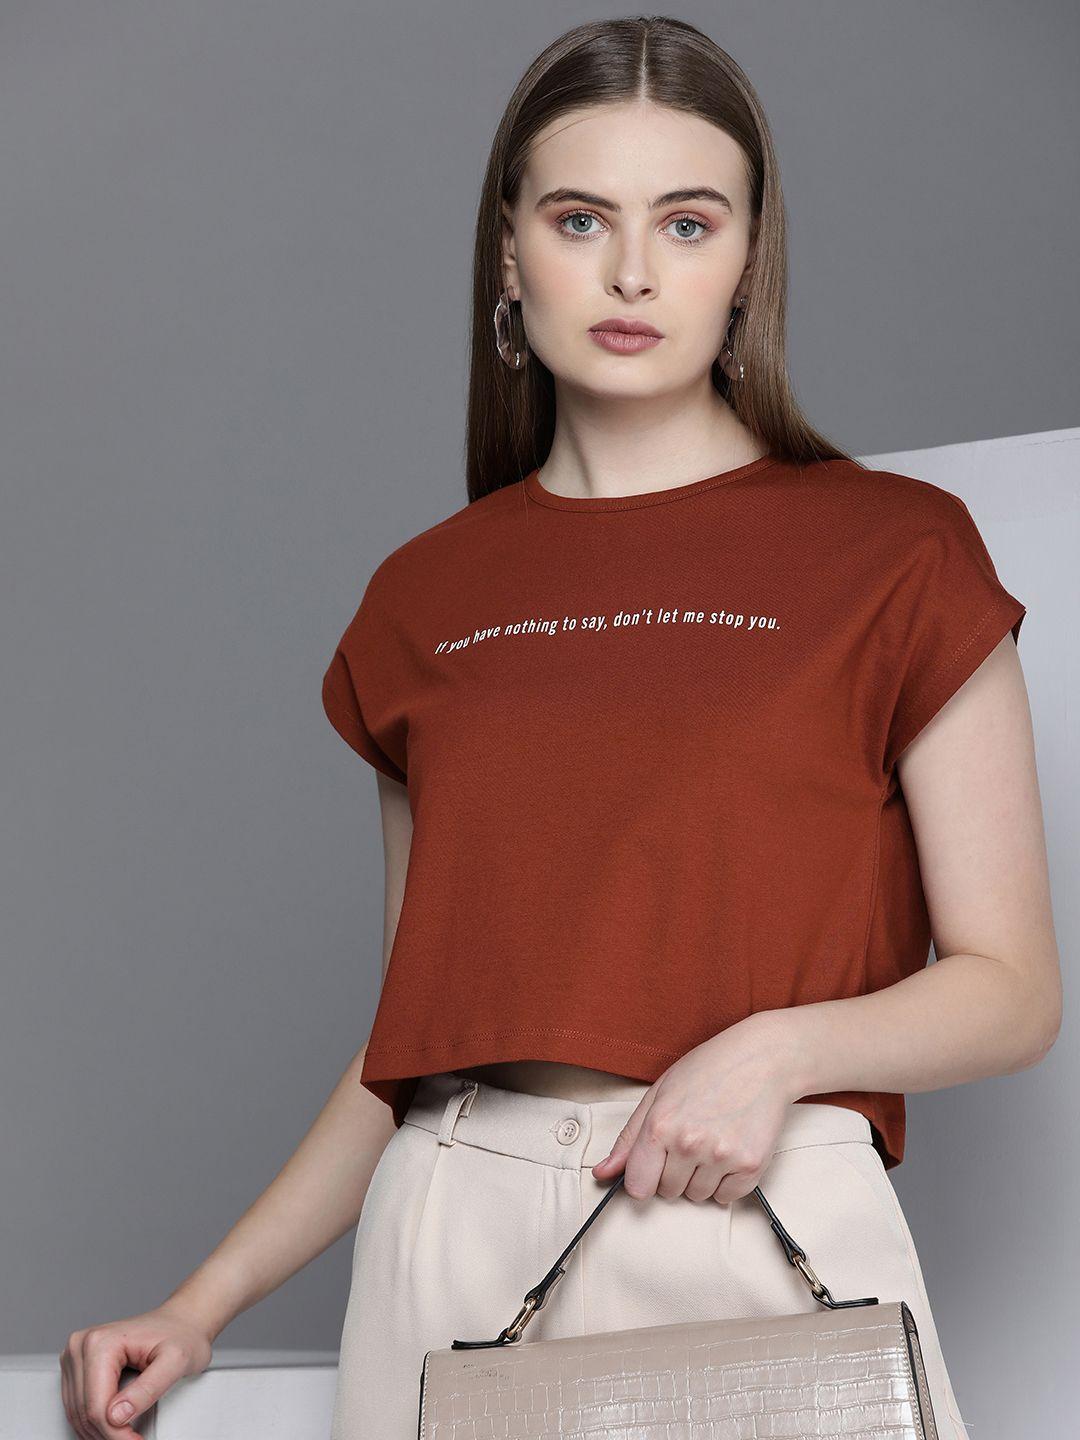 kenneth cole voice tee women rust red pure cotton printed extended sleeves boxy t-shirt